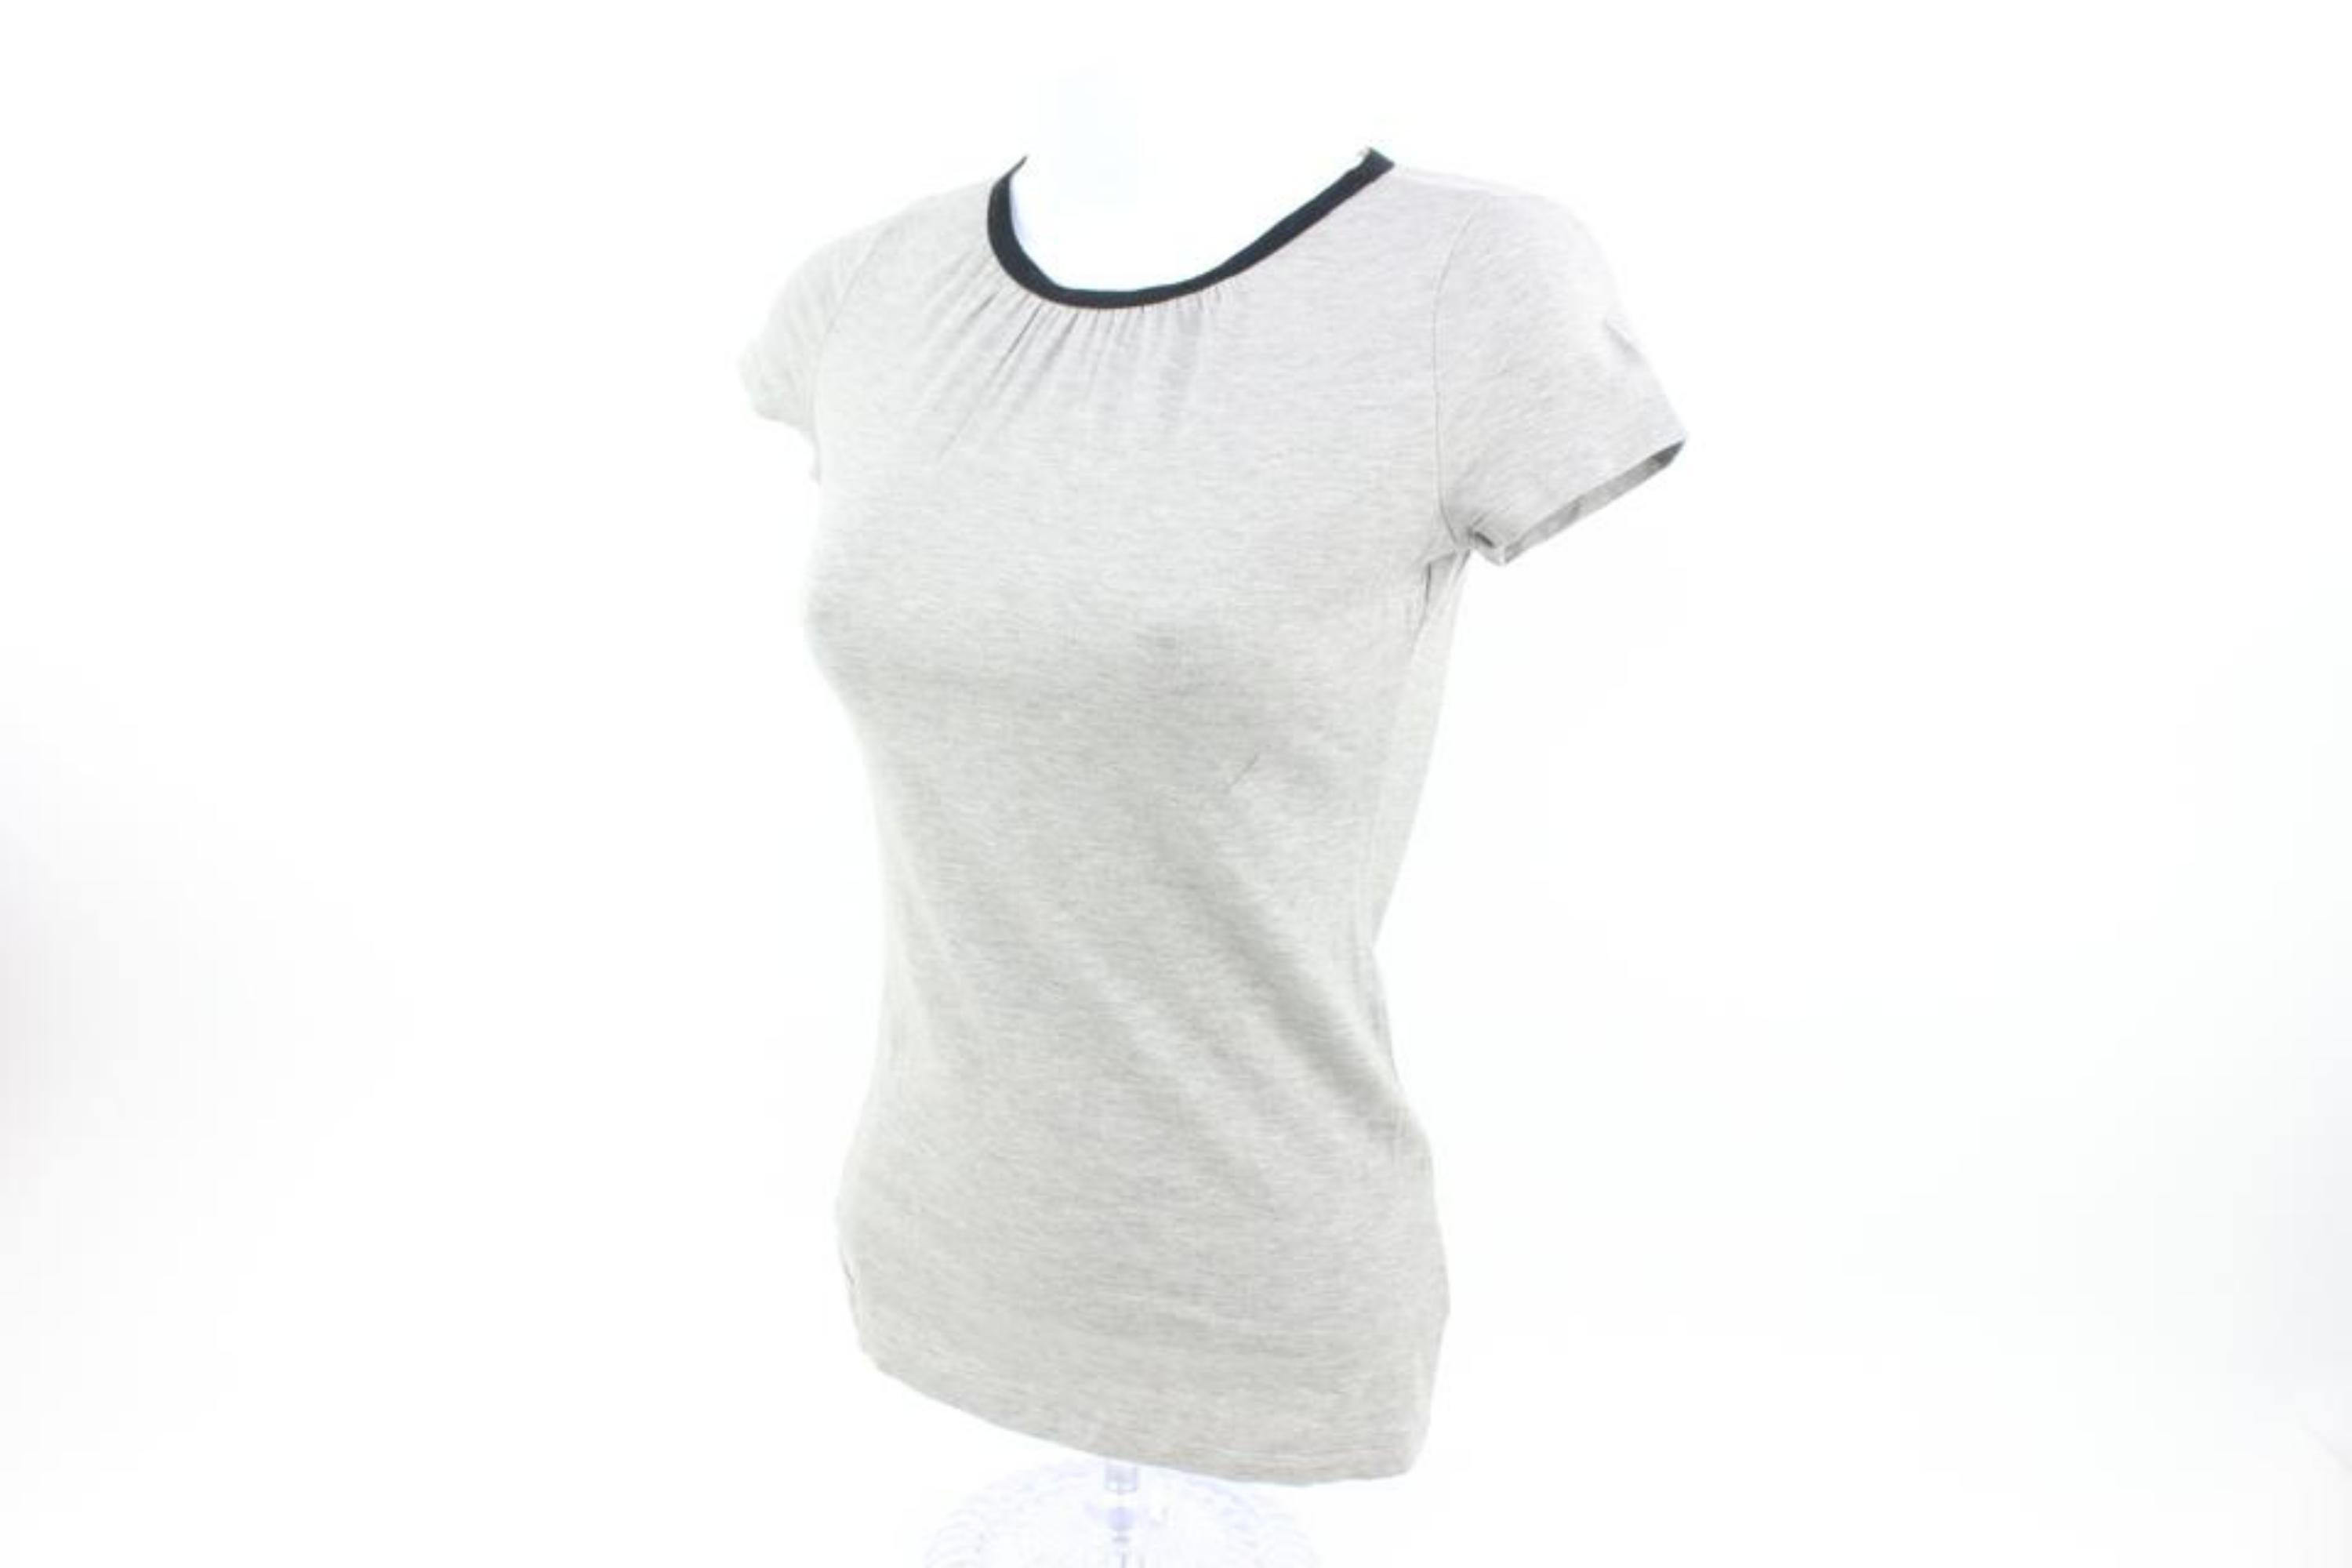 Gucci Women's XS Light Grey Short Sleeve Short 121g35
Made In: Italy
Measurements: Length:  14